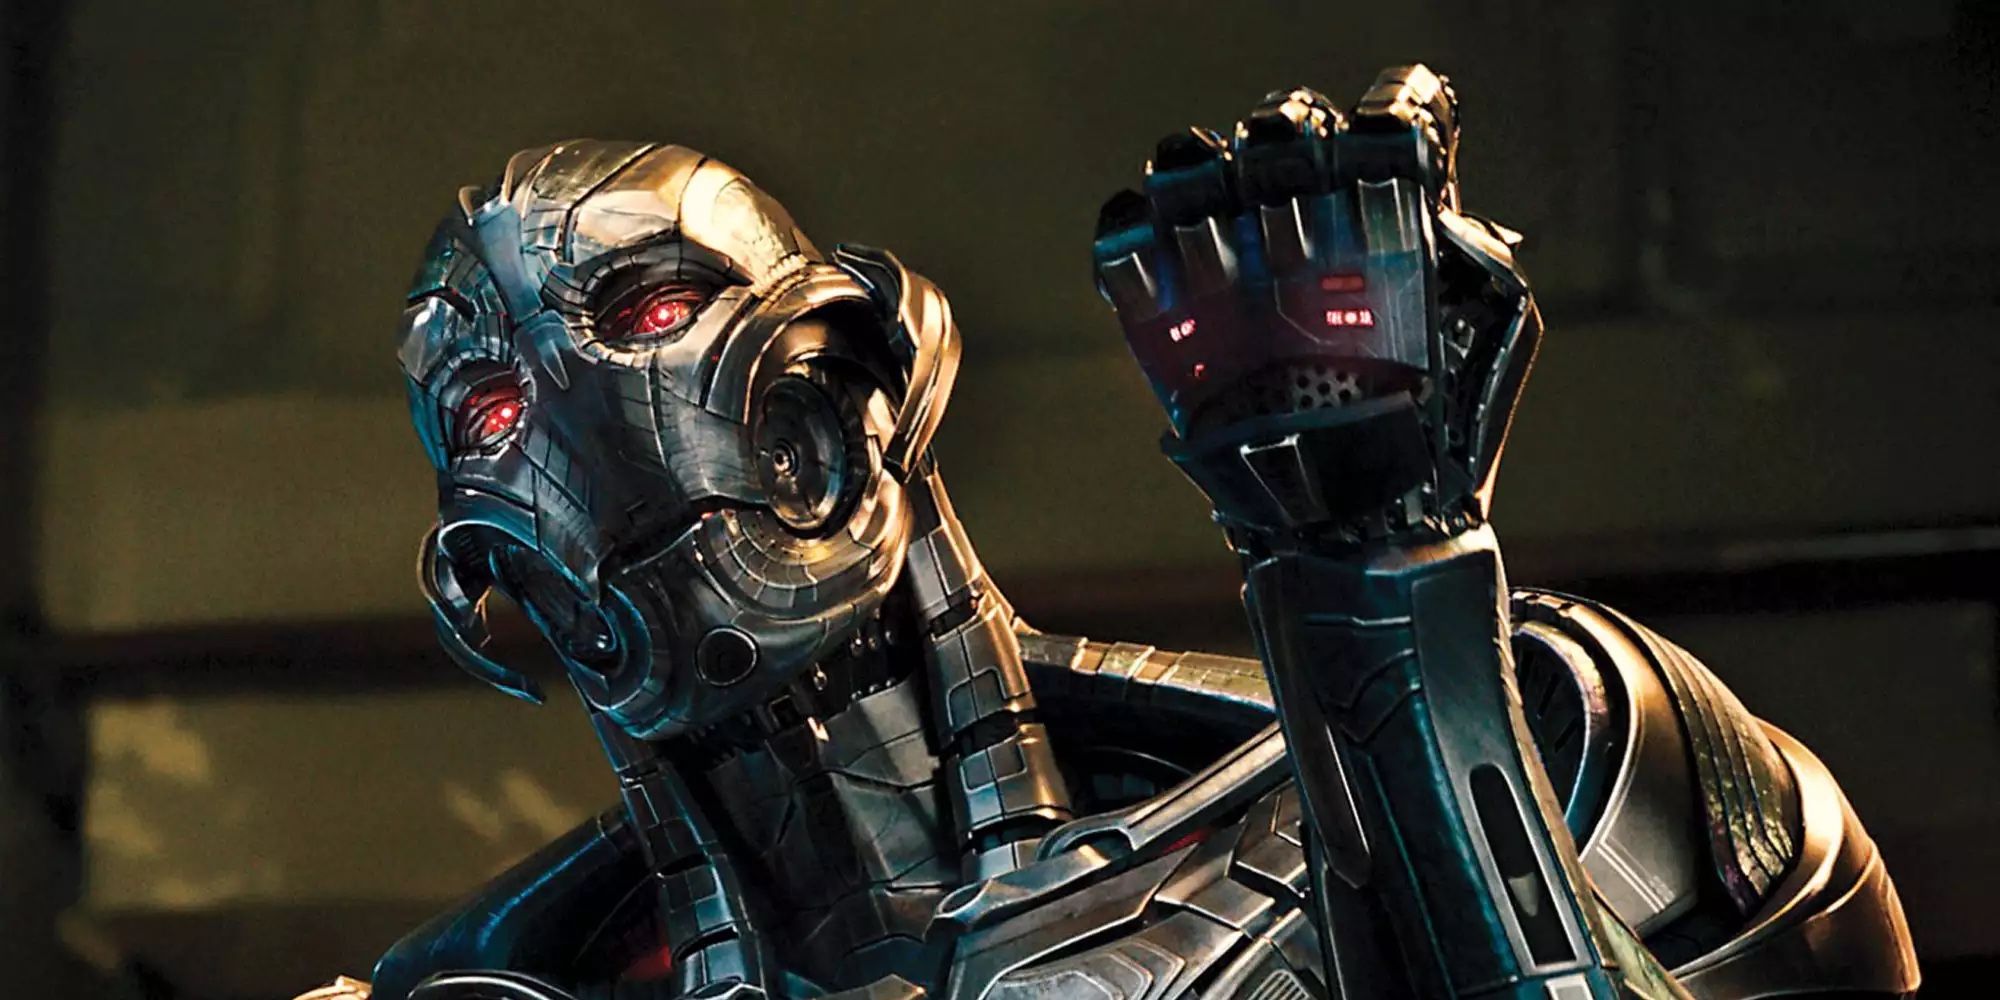 Ultron clenches his fist in 